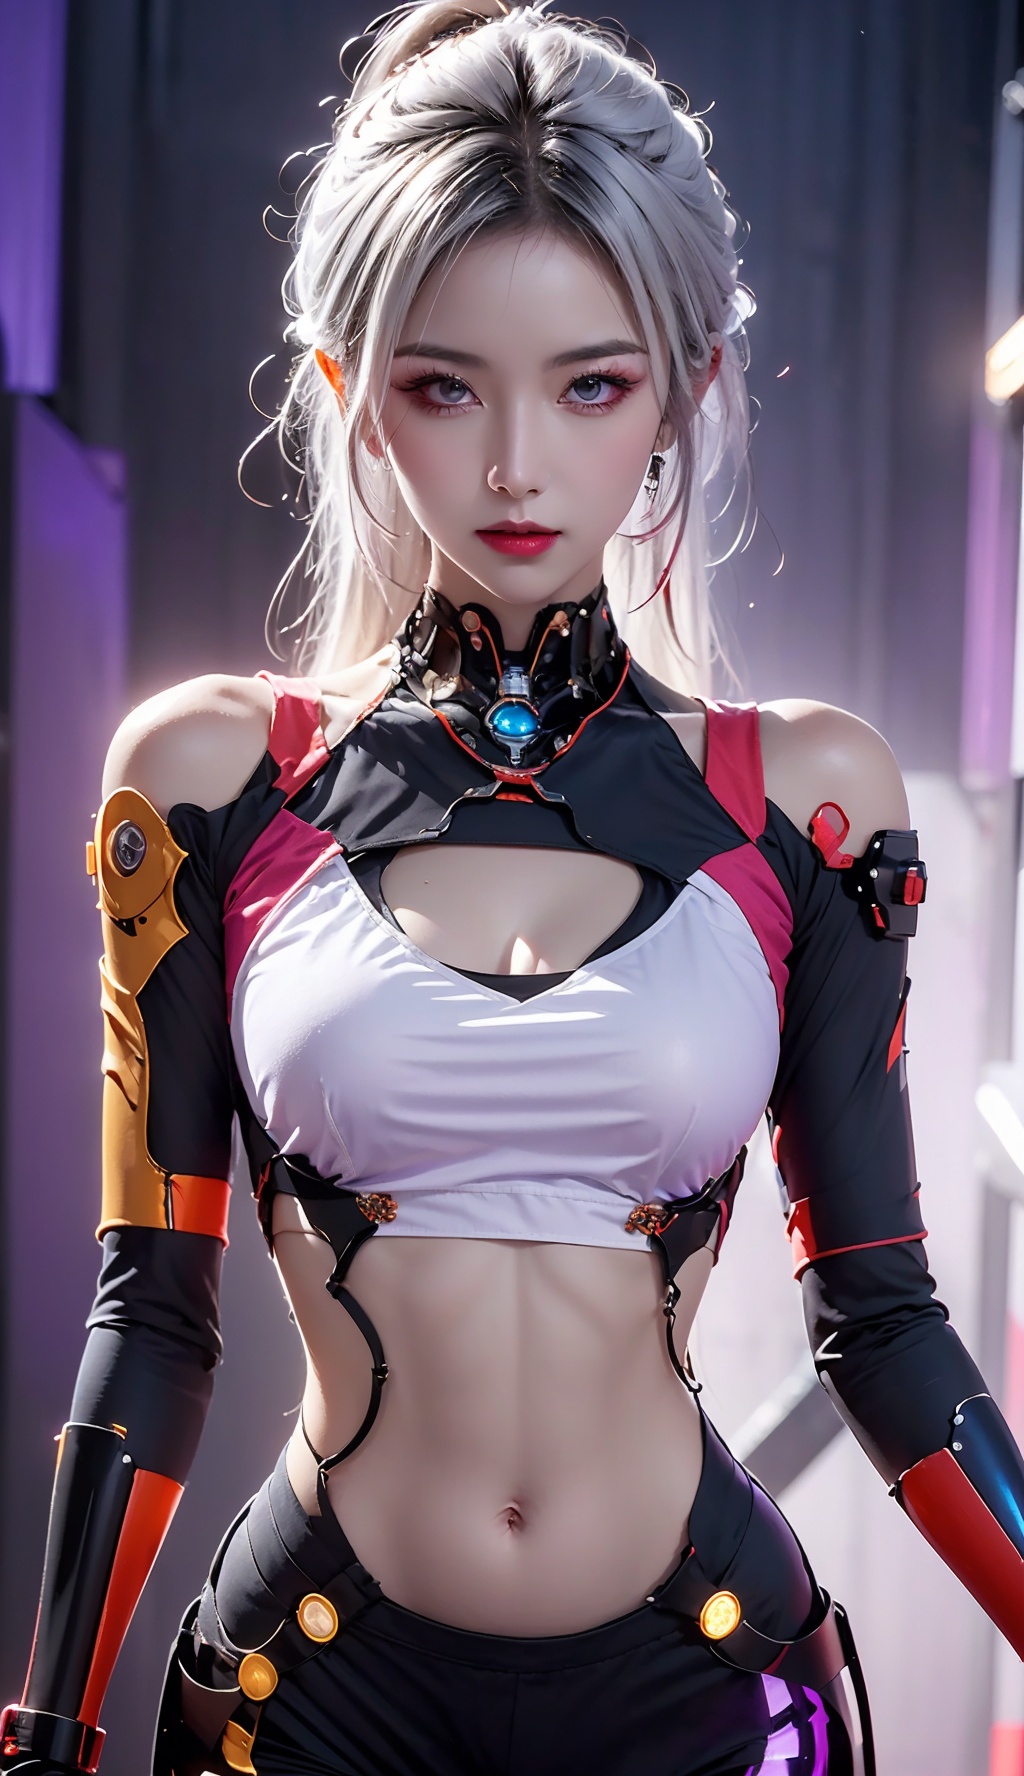 best quality, 8k, concept art, Thought-Provoking Aunt of Blood, half body,intricate details, JoJo pose, Straps, Rings, Gloves, Low shutter, (Violet power aura:1.2), most beautiful artwork in the world, navel, White hair,aesthetics, atmosphere, (neon,cyborg:1.1), fantasy,